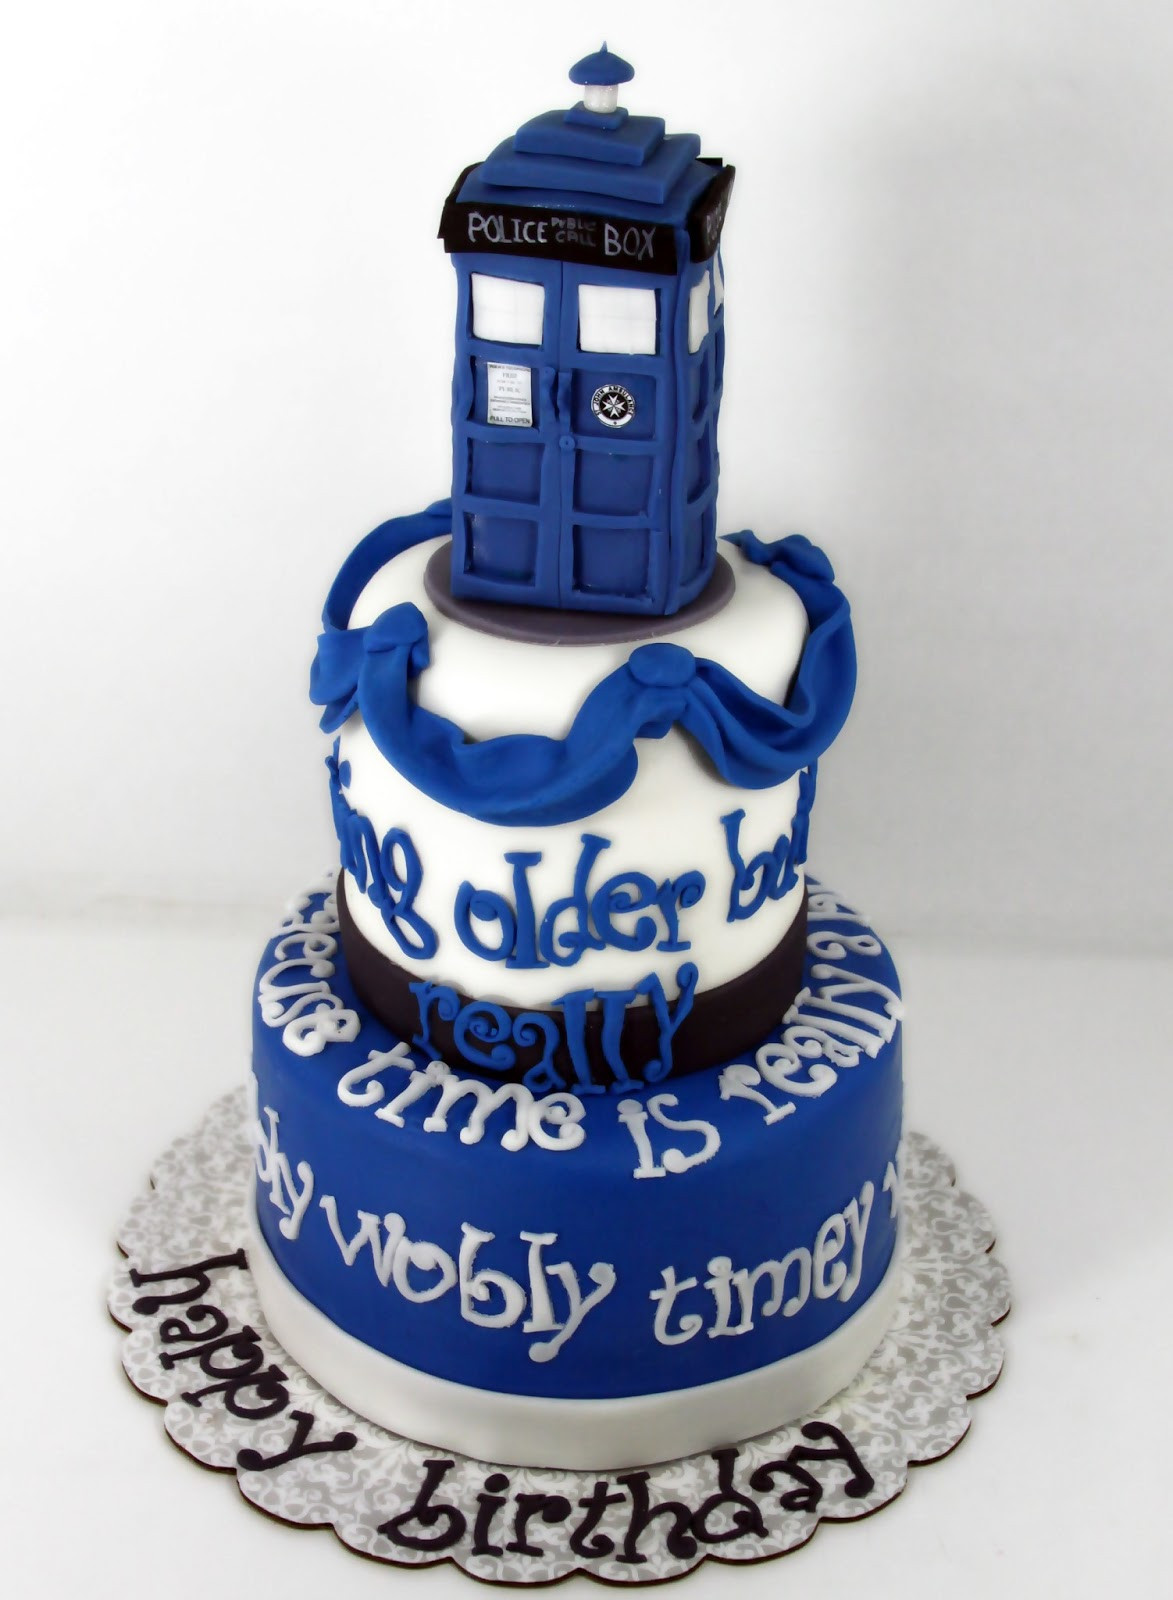 Dr Who Birthday Cake
 1173px